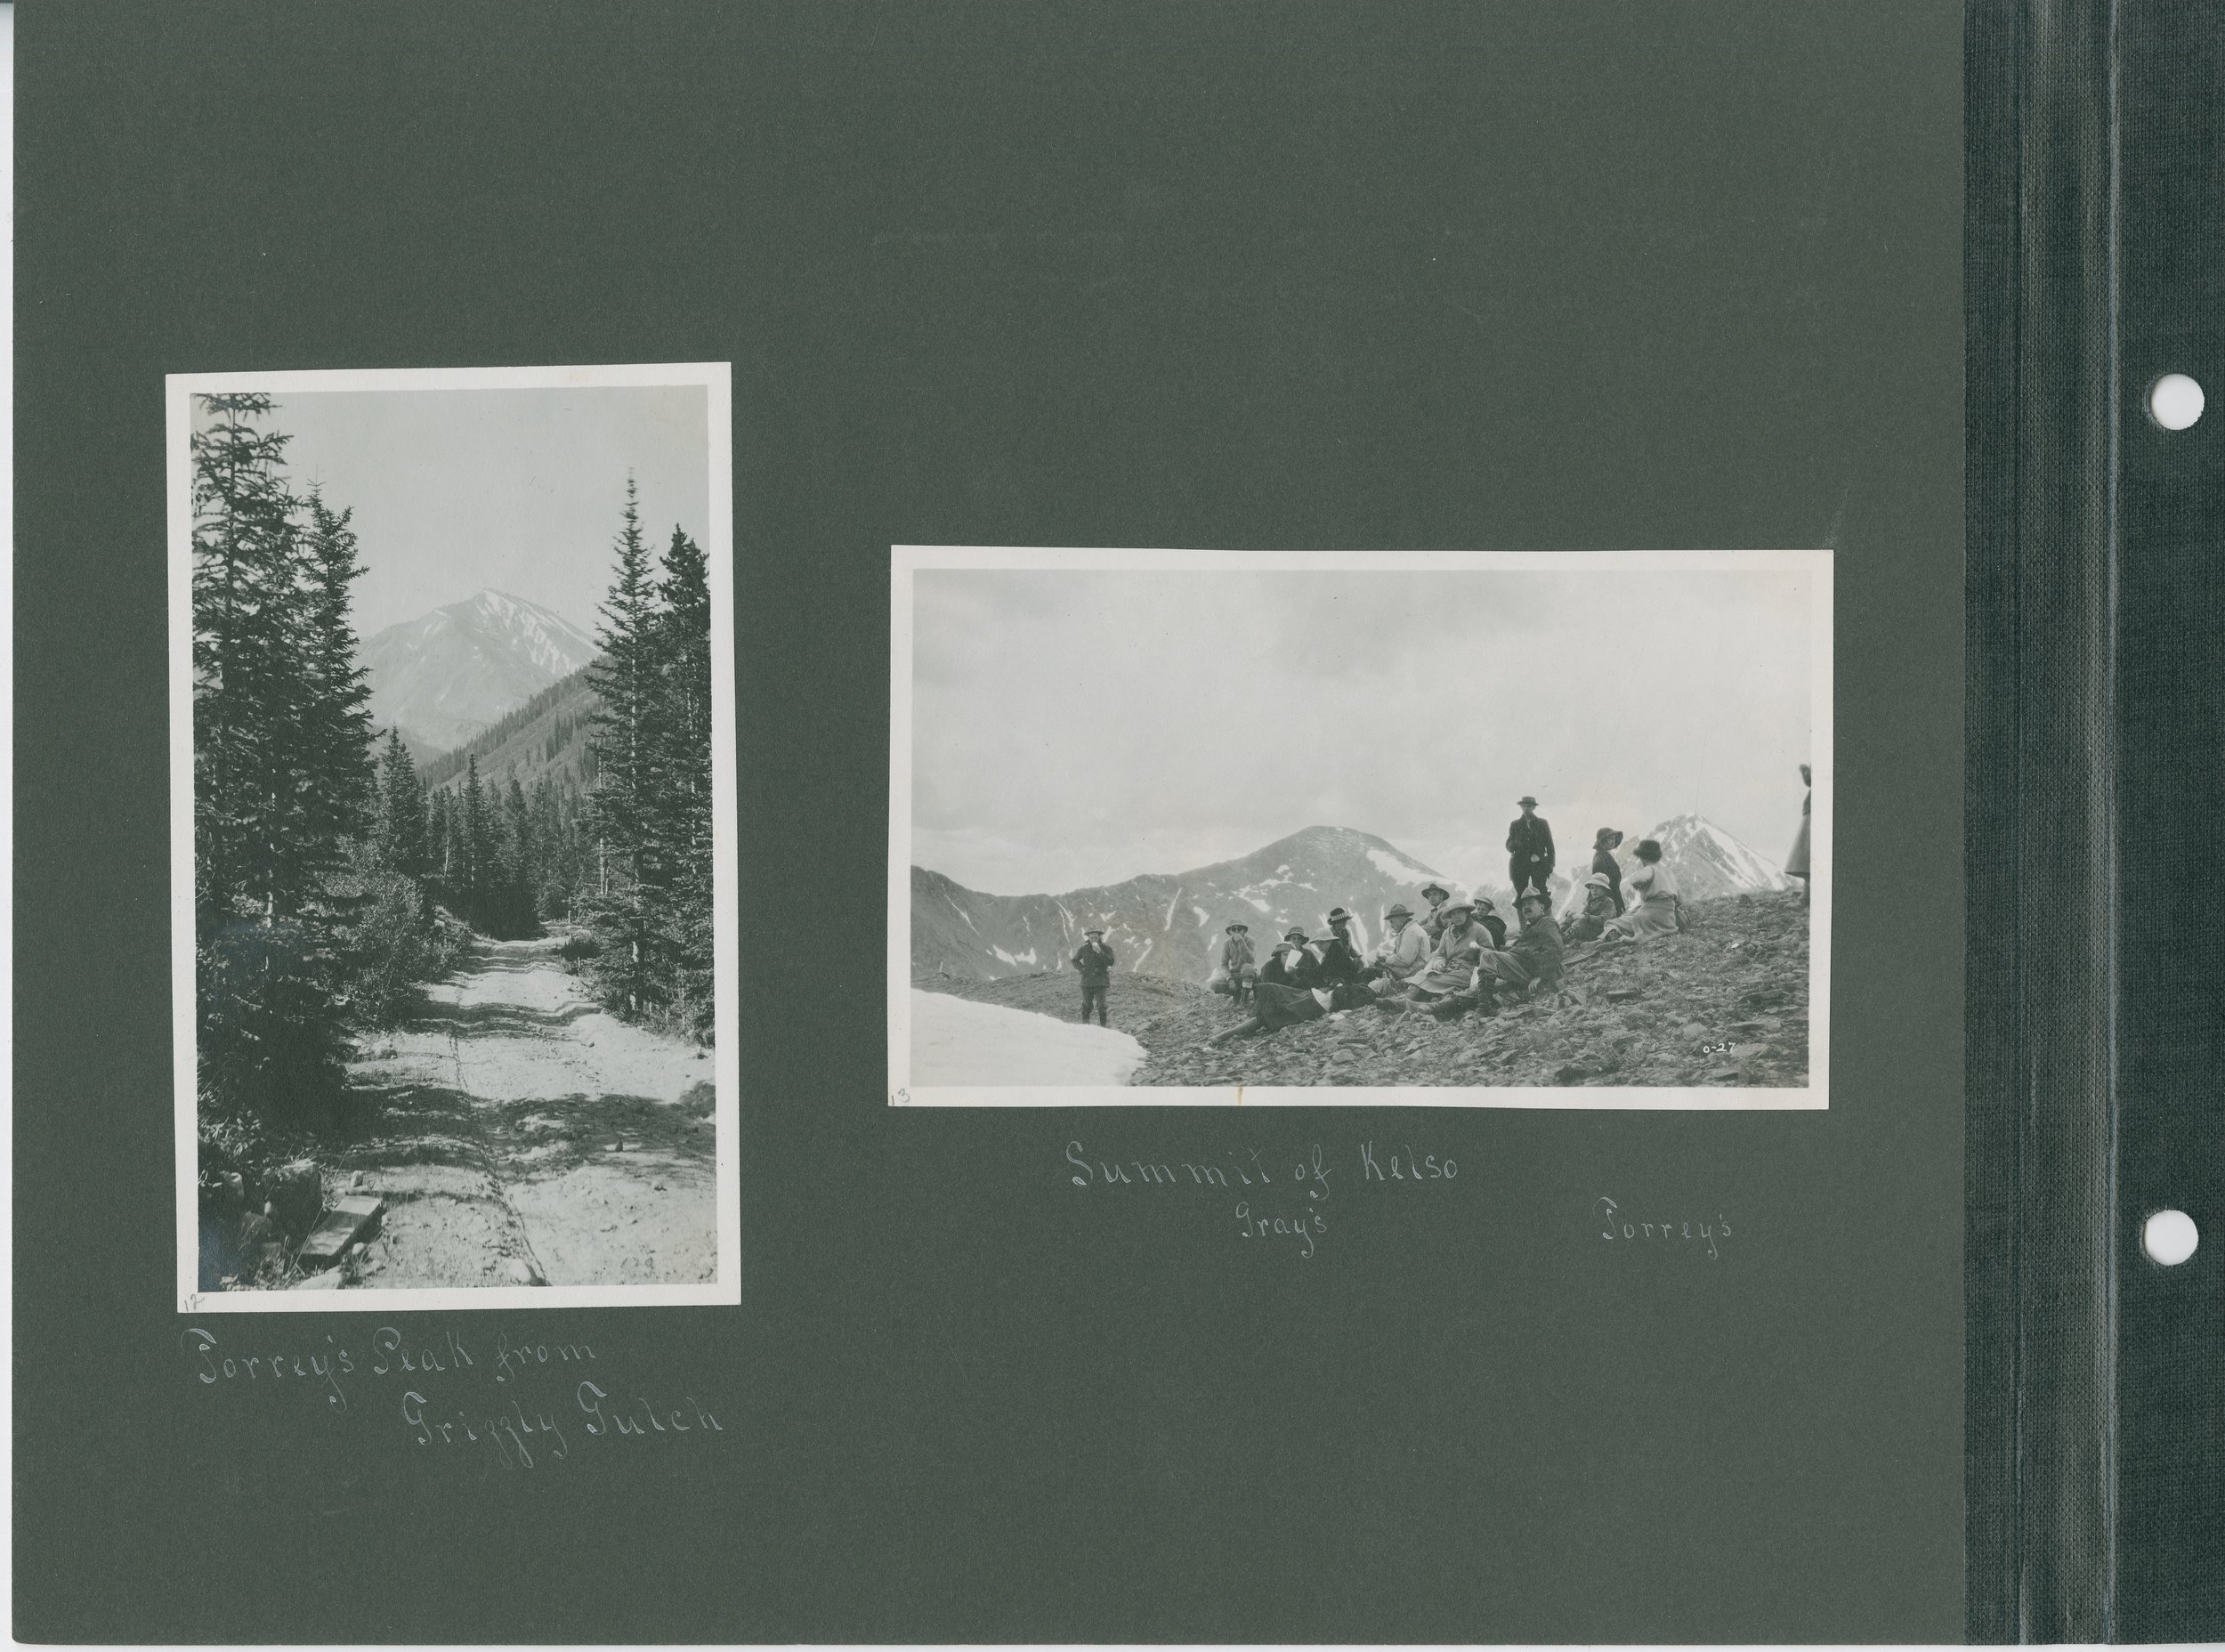  Left: Torrey’s Peak from Grizzly Gulch, Right: Summit of Kelso 